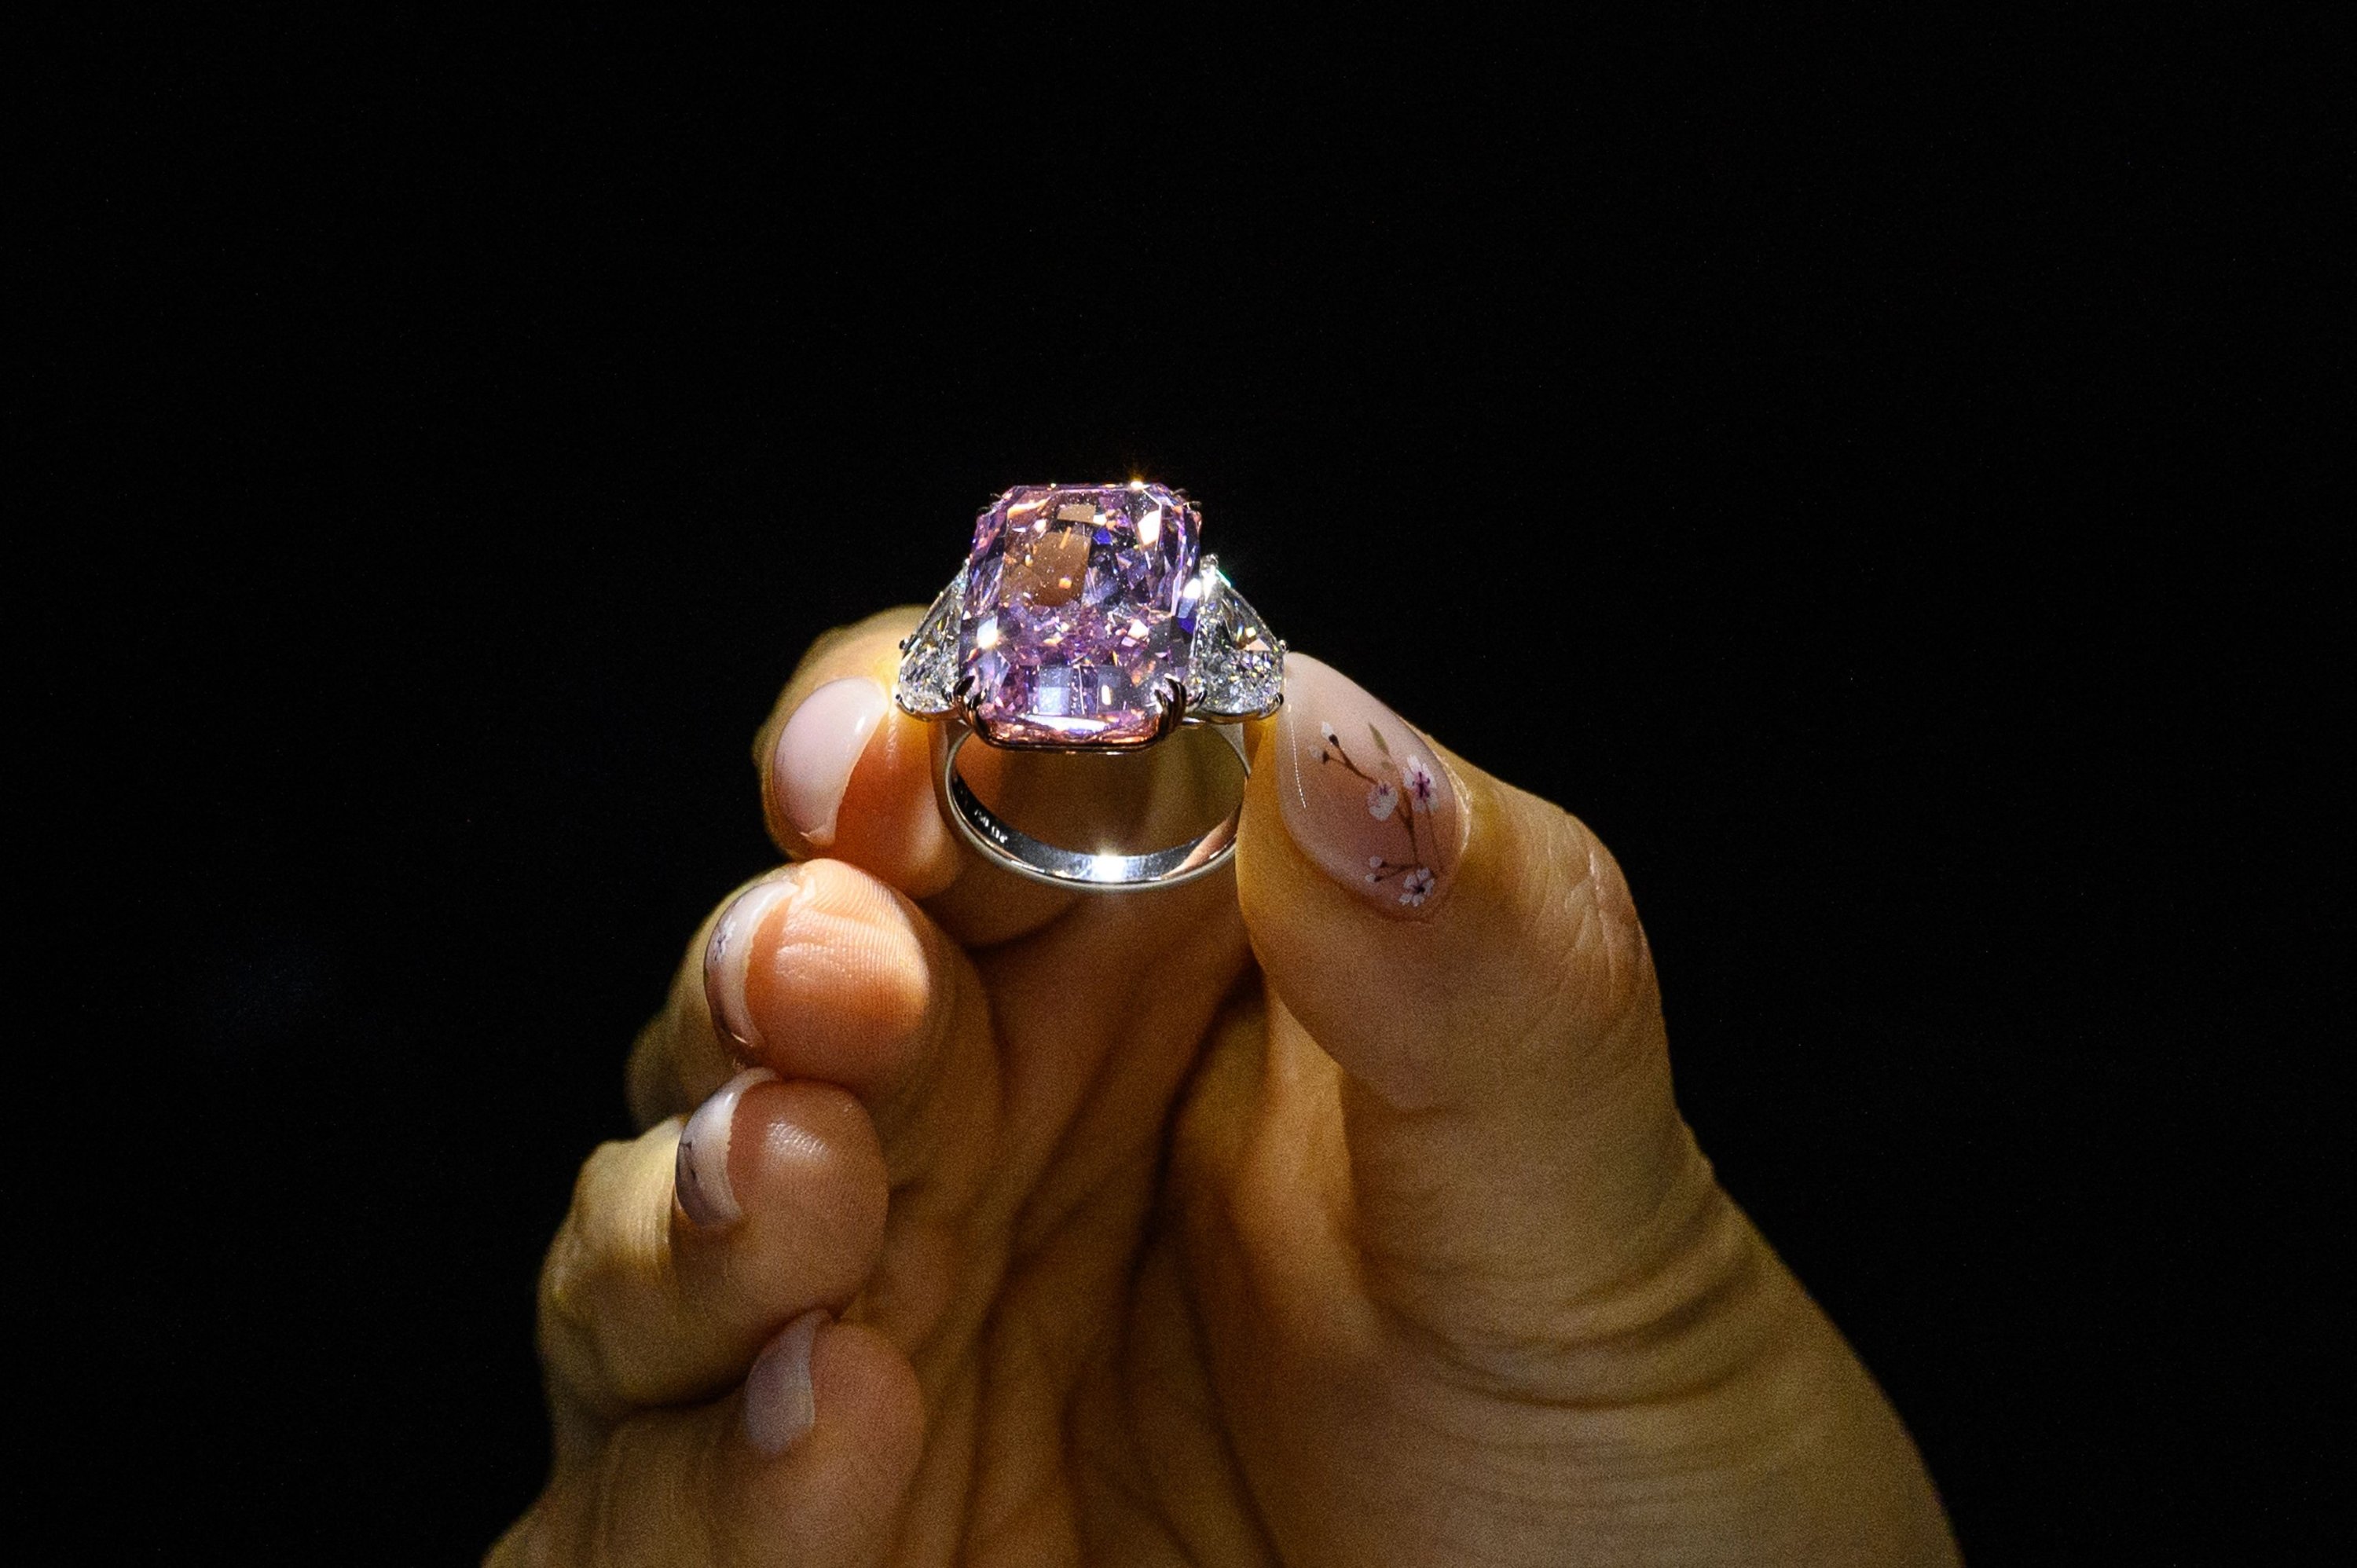 A woman displays the Sakura Diamond, a 15.81 carat fancy vivid purple-pink diamond ring, during a Christies pre-auction preview in Hong Kong, May 20, 2021. (AFP Photo)